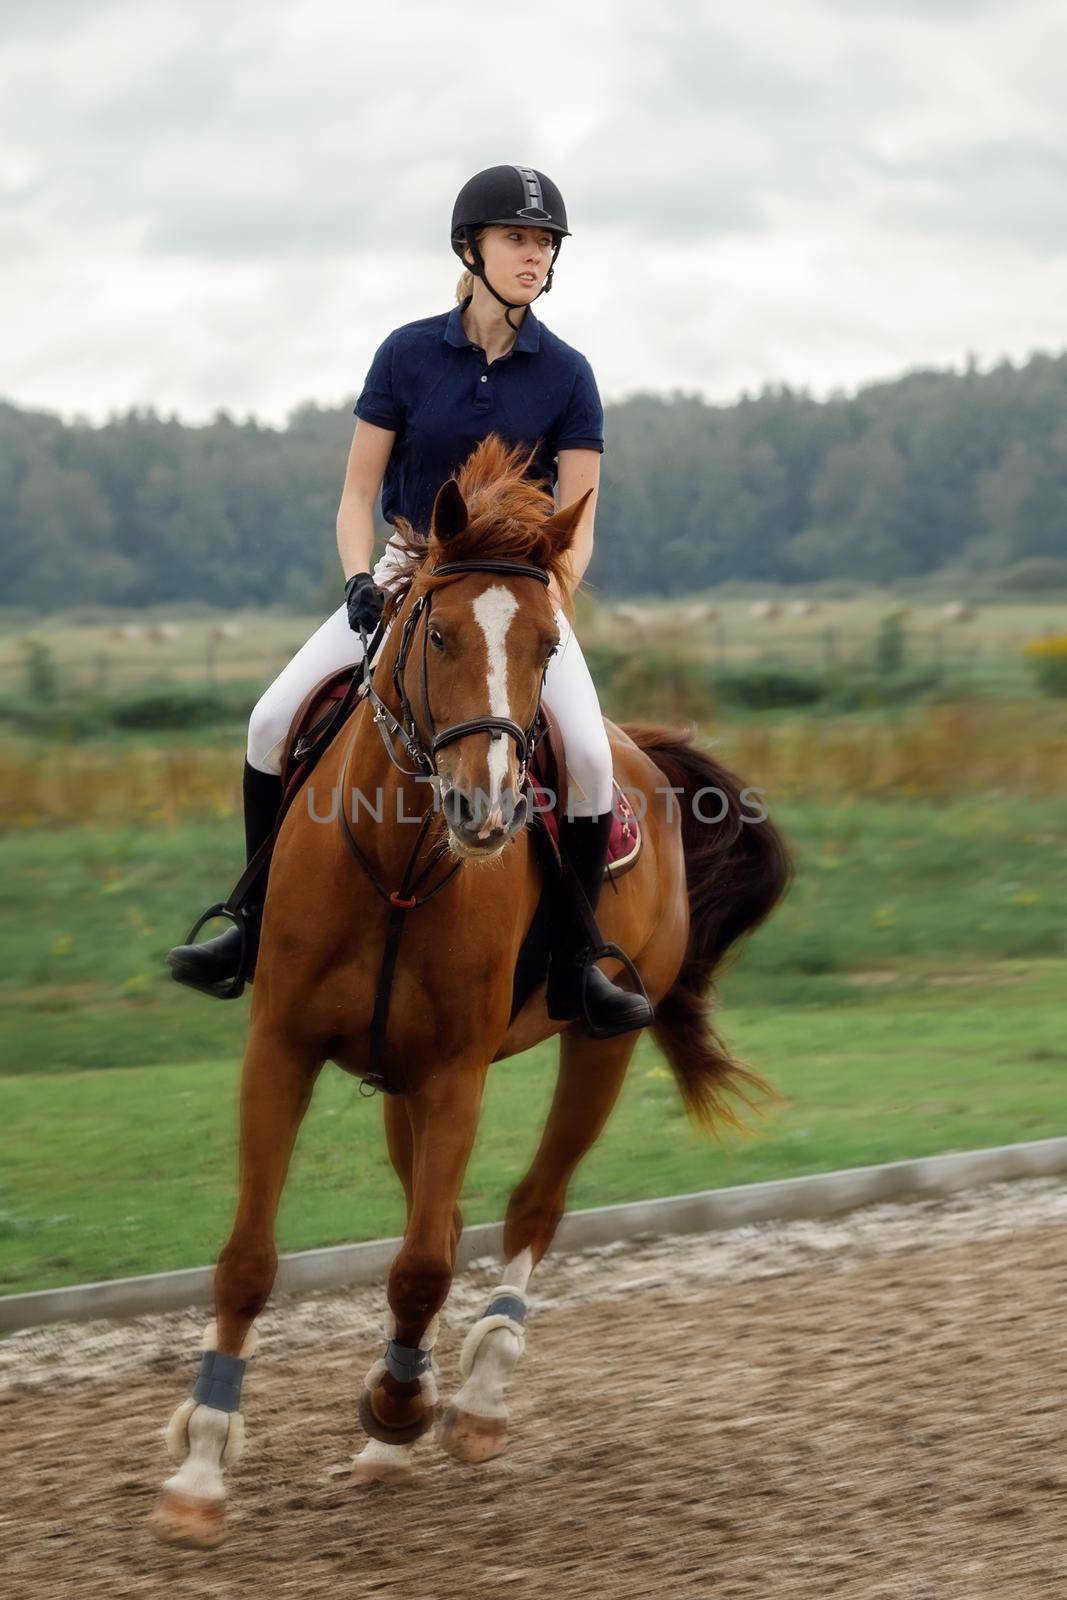 Girl, horse rider, during a match, in torque, high speed, in motion blur. Equestrian sport in details. Sport horse and rider.